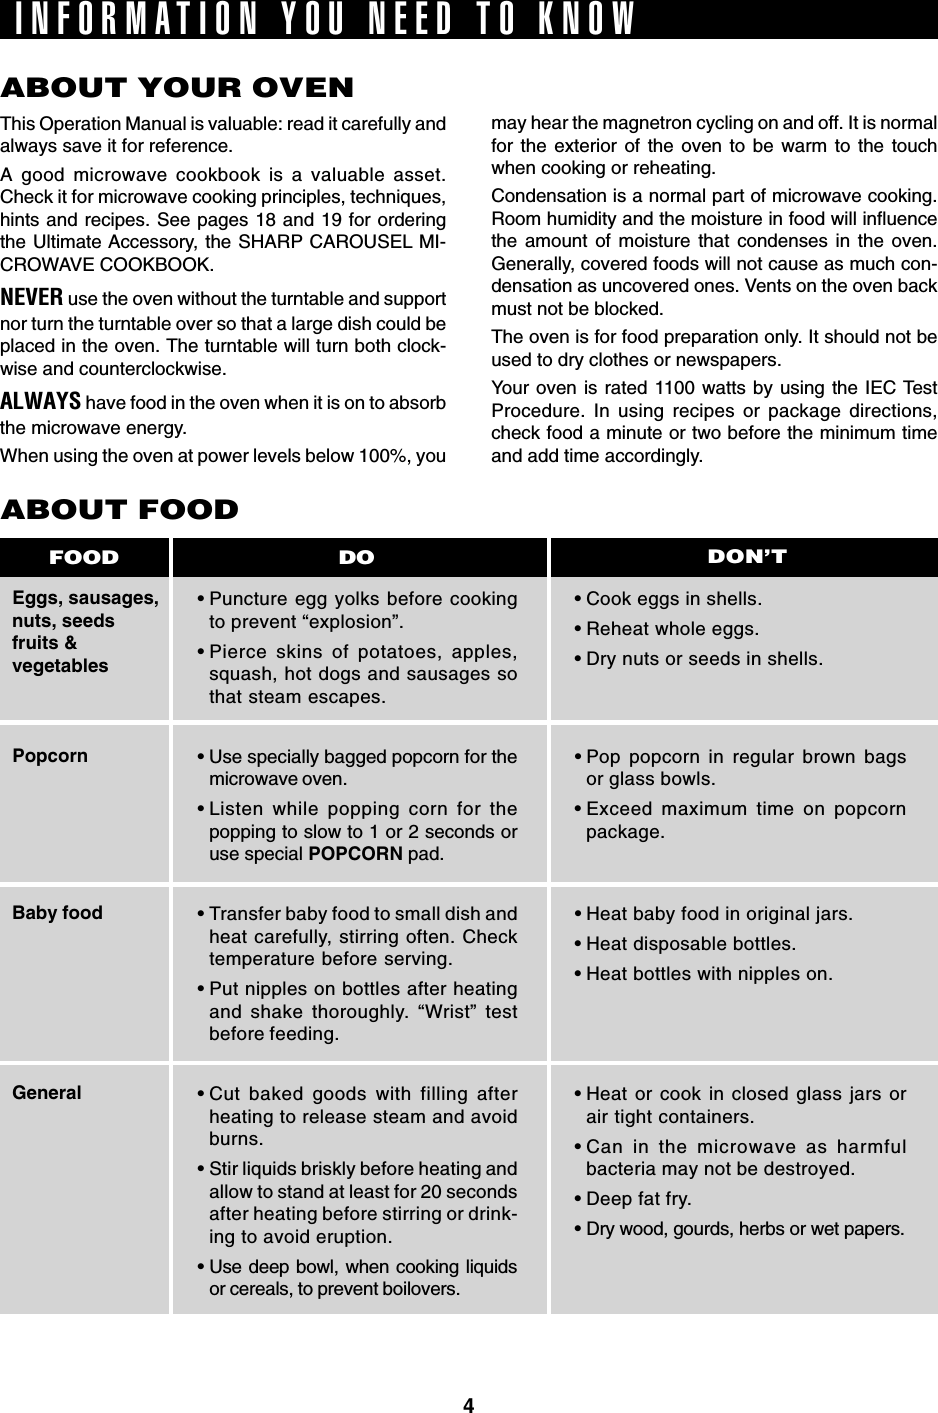 4INFORMATION YOU NEED TO KNOWABOUT YOUR OVENThis Operation Manual is valuable: read it carefully andalways save it for reference.A good microwave cookbook is a valuable asset.Check it for microwave cooking principles, techniques,hints and recipes. See pages 18 and 19 for orderingthe Ultimate Accessory, the SHARP CAROUSEL MI-CROWAVE COOKBOOK.NEVER use the oven without the turntable and supportnor turn the turntable over so that a large dish could beplaced in the oven. The turntable will turn both clock-wise and counterclockwise.ALWAYS have food in the oven when it is on to absorbthe microwave energy.When using the oven at power levels below 100%, youEggs, sausages,nuts, seedsfruits &amp;vegetablesPopcornBaby foodGeneralABOUT FOOD•Puncture egg yolks before cookingto prevent “explosion”.•Pierce skins of potatoes, apples,squash, hot dogs and sausages sothat steam escapes.• Use specially bagged popcorn for themicrowave oven.•Listen while popping corn for thepopping to slow to 1 or 2 seconds oruse special POPCORN pad.•Transfer baby food to small dish andheat carefully, stirring often. Checktemperature before serving.•Put nipples on bottles after heatingand shake thoroughly. “Wrist” testbefore feeding.•Cut baked goods with filling afterheating to release steam and avoidburns.•Stir liquids briskly before heating andallow to stand at least for 20 secondsafter heating before stirring or drink-ing to avoid eruption.•Use deep bowl, when cooking liquidsor cereals, to prevent boilovers.•Cook eggs in shells.•Reheat whole eggs.•Dry nuts or seeds in shells.•Pop popcorn in regular brown bagsor glass bowls.•Exceed maximum time on popcornpackage.•Heat baby food in original jars.•Heat disposable bottles.•Heat bottles with nipples on.•Heat or cook in closed glass jars orair tight containers.•Can in the microwave as harmfulbacteria may not be destroyed.•Deep fat fry.•Dry wood, gourds, herbs or wet papers.DO DON’TFOODmay hear the magnetron cycling on and off. It is normalfor the exterior of the oven to be warm to the touchwhen cooking or reheating.Condensation is a normal part of microwave cooking.Room humidity and the moisture in food will influencethe amount of moisture that condenses in the oven.Generally, covered foods will not cause as much con-densation as uncovered ones. Vents on the oven backmust not be blocked.The oven is for food preparation only. It should not beused to dry clothes or newspapers.Your oven is rated 1100 watts by using the IEC TestProcedure. In using recipes or package directions,check food a minute or two before the minimum timeand add time accordingly.